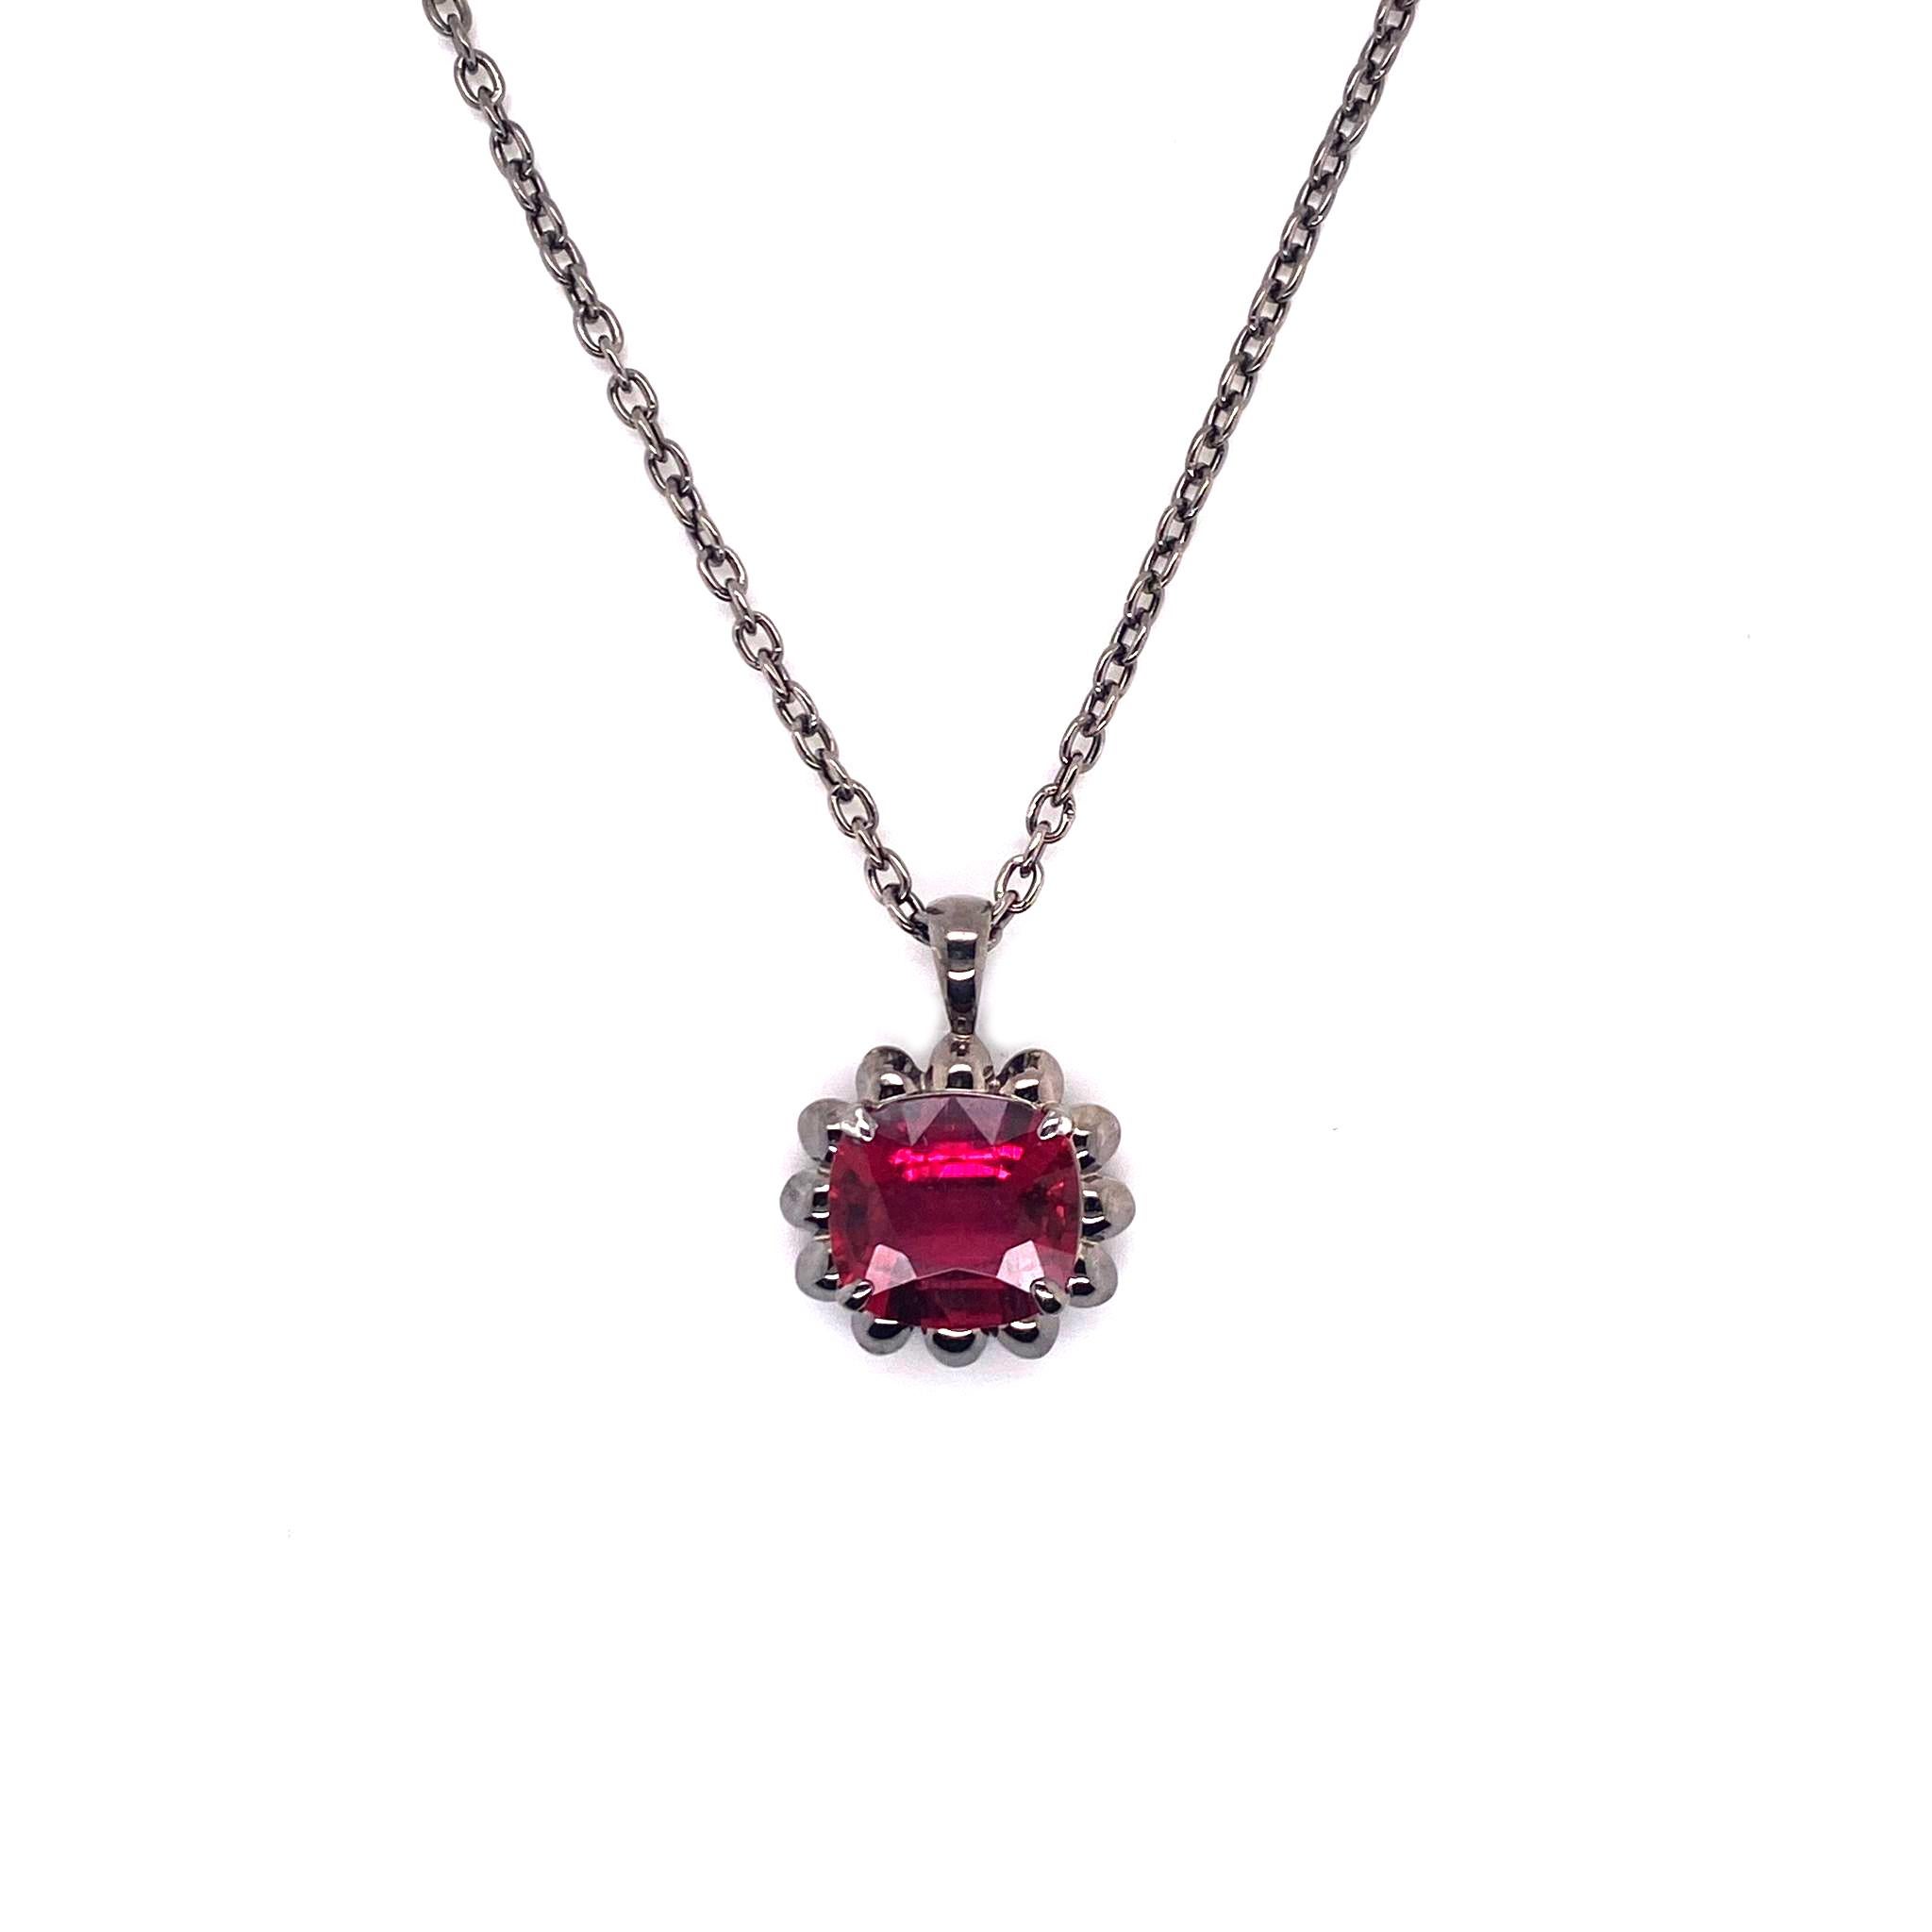 Rubelite Pendant with Black Rhodium in 18K White Gold, from 'G-One' Collection.
G-One Collection undeniably carries the most special pieces of Goshwara. The sought-after, one-of-a-kind pieces speak to each unique personality of the person wearing